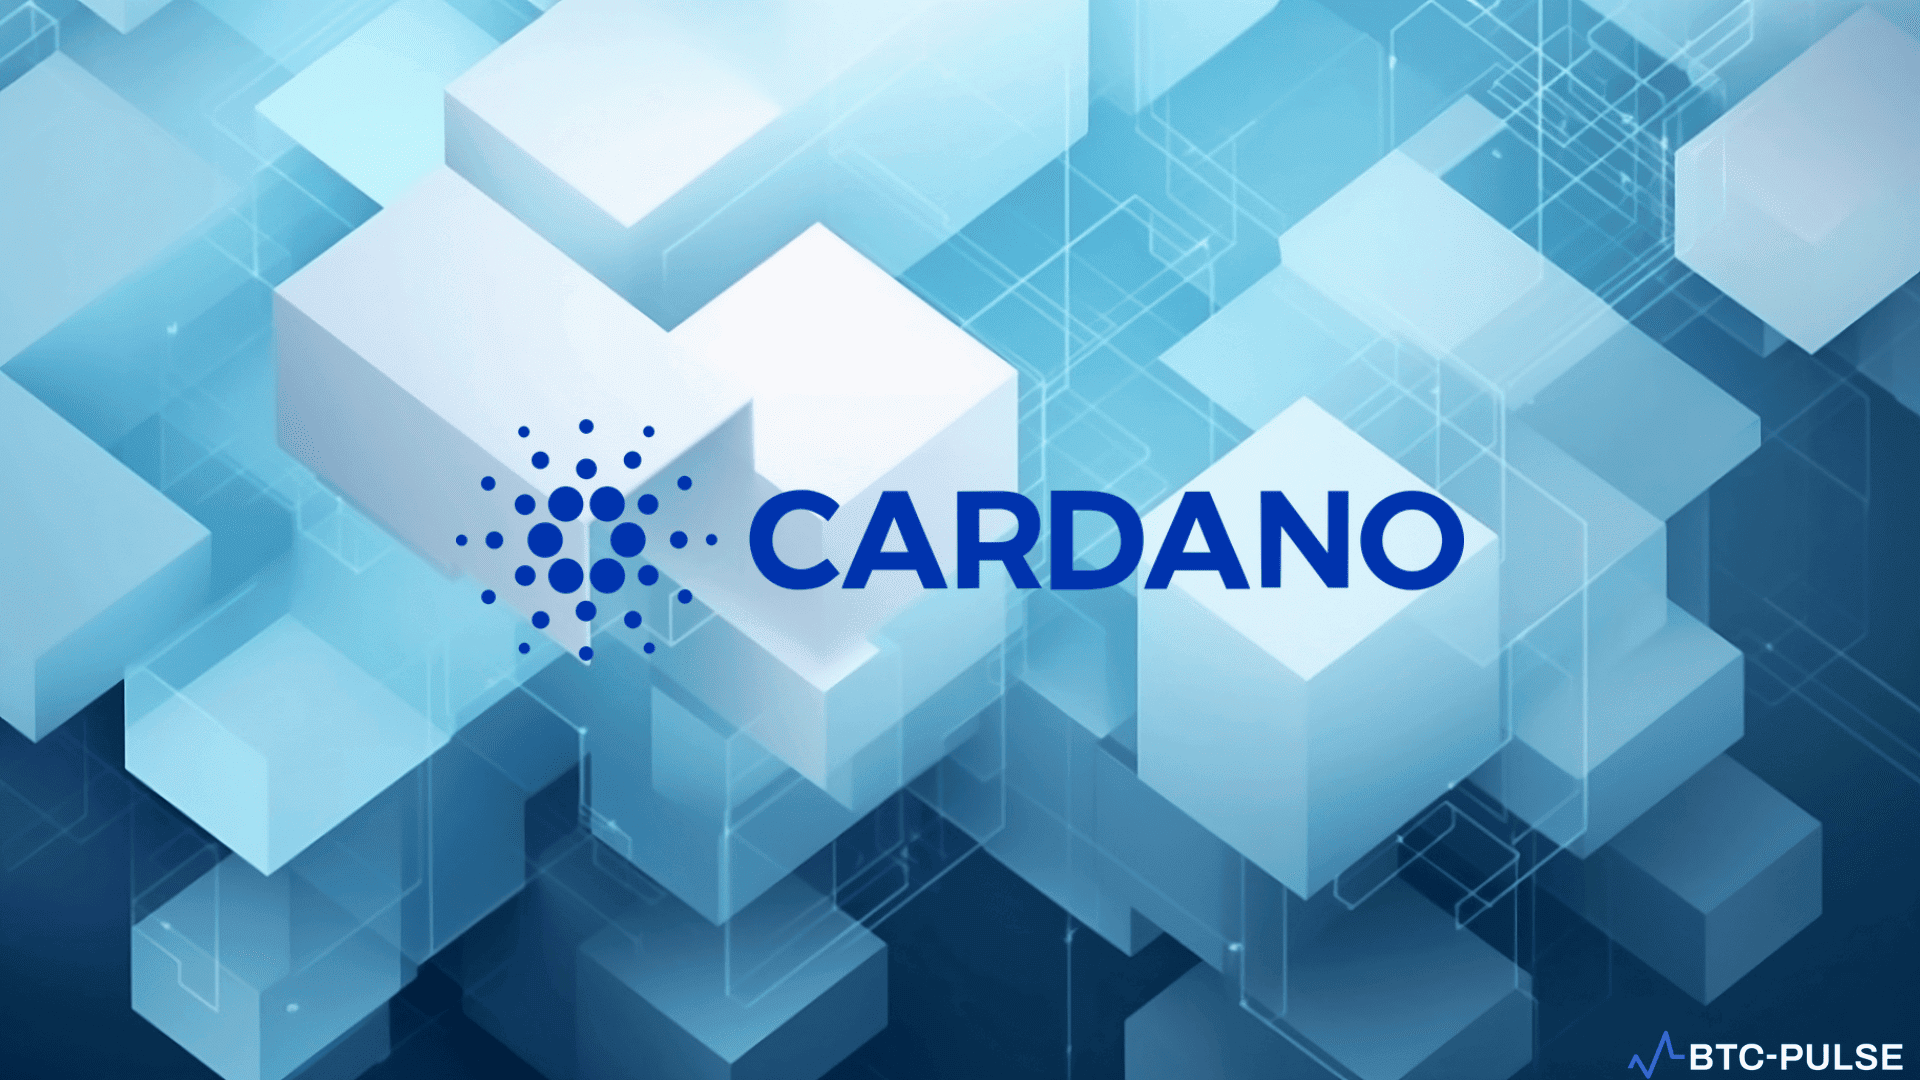 Cardano's Deliberate Progress: A Reflection of Its Academic Foundations, Says CEO